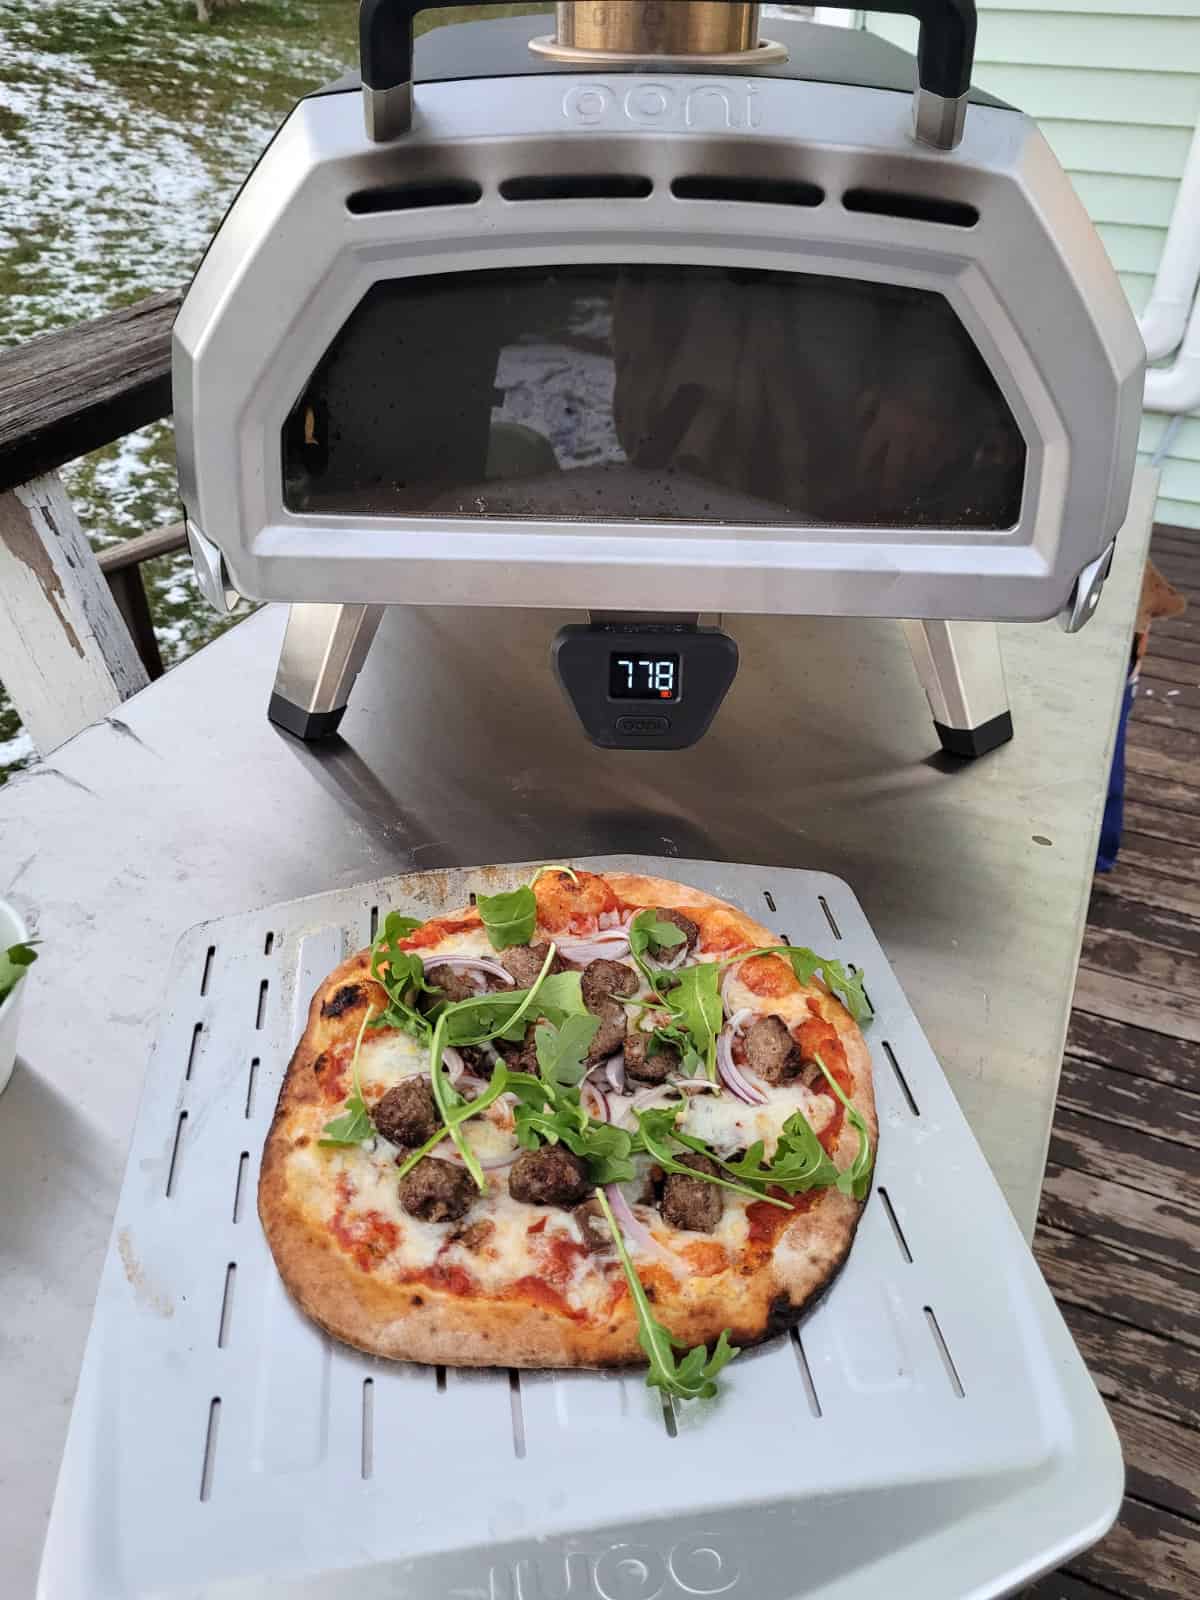 Wood fired meatball pizza fresh out of the ooni pizza oven on a steel pizza peel.